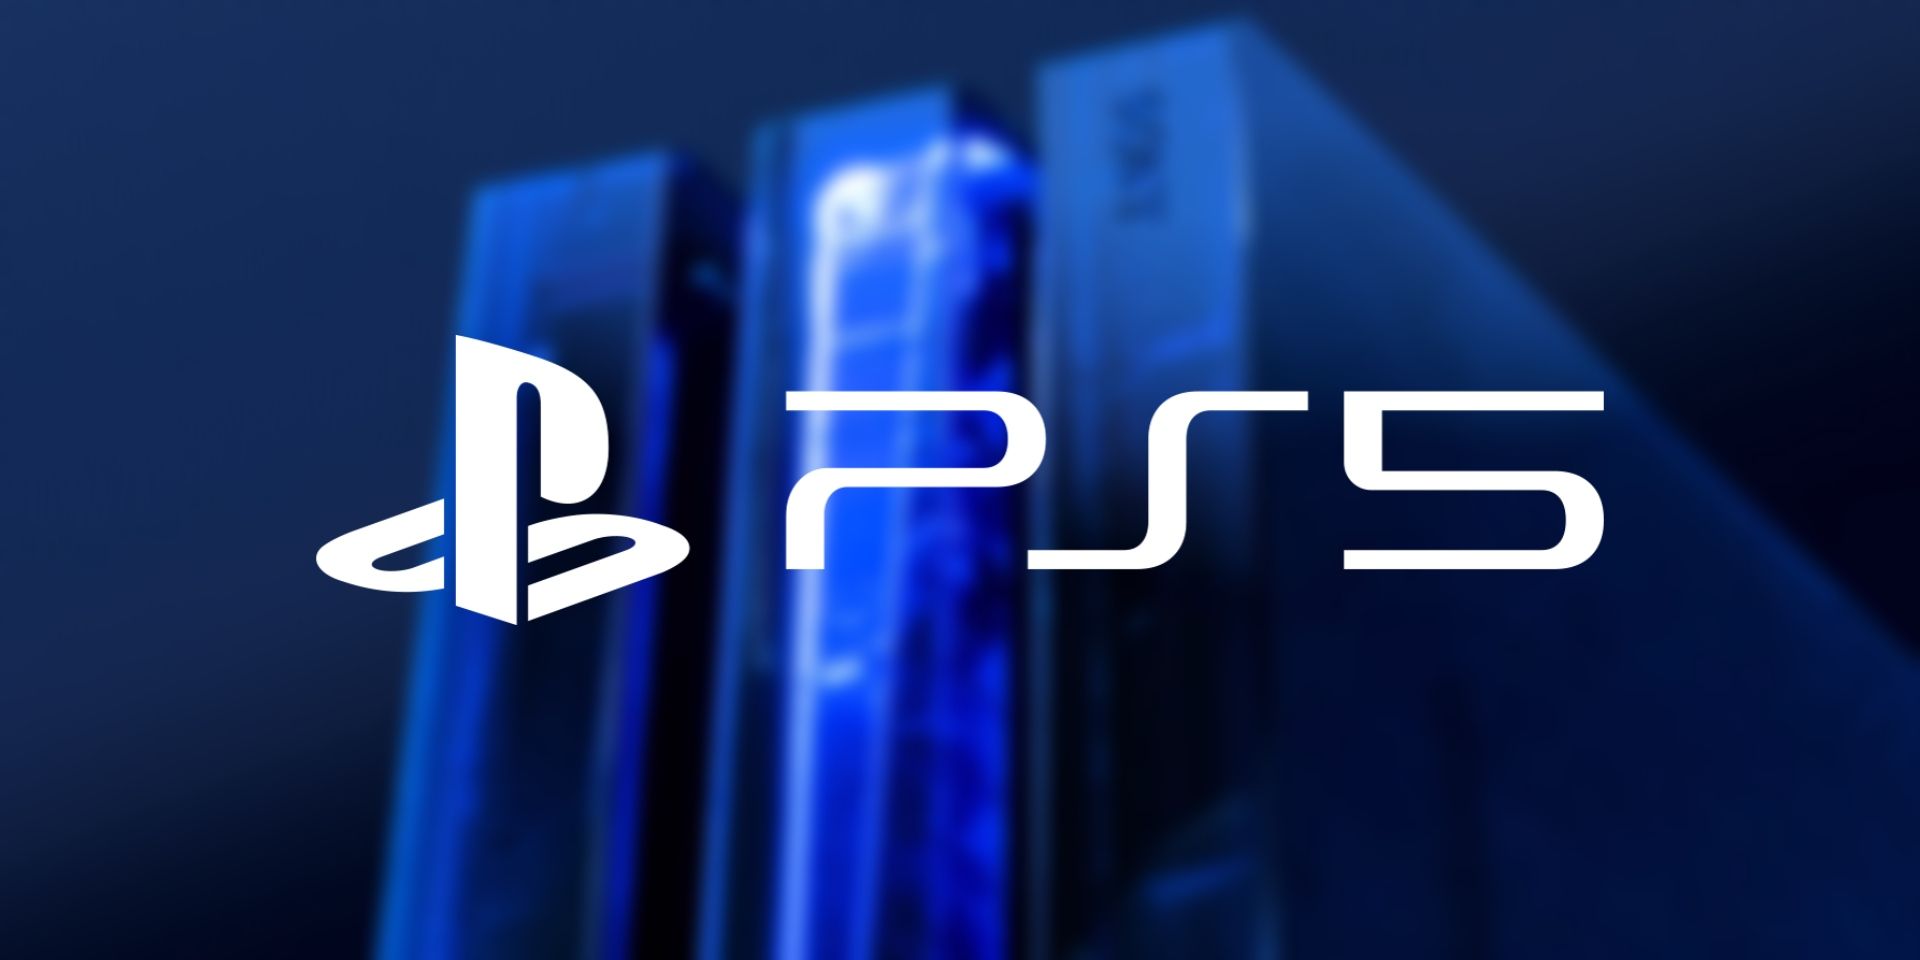 what will be the price for ps5